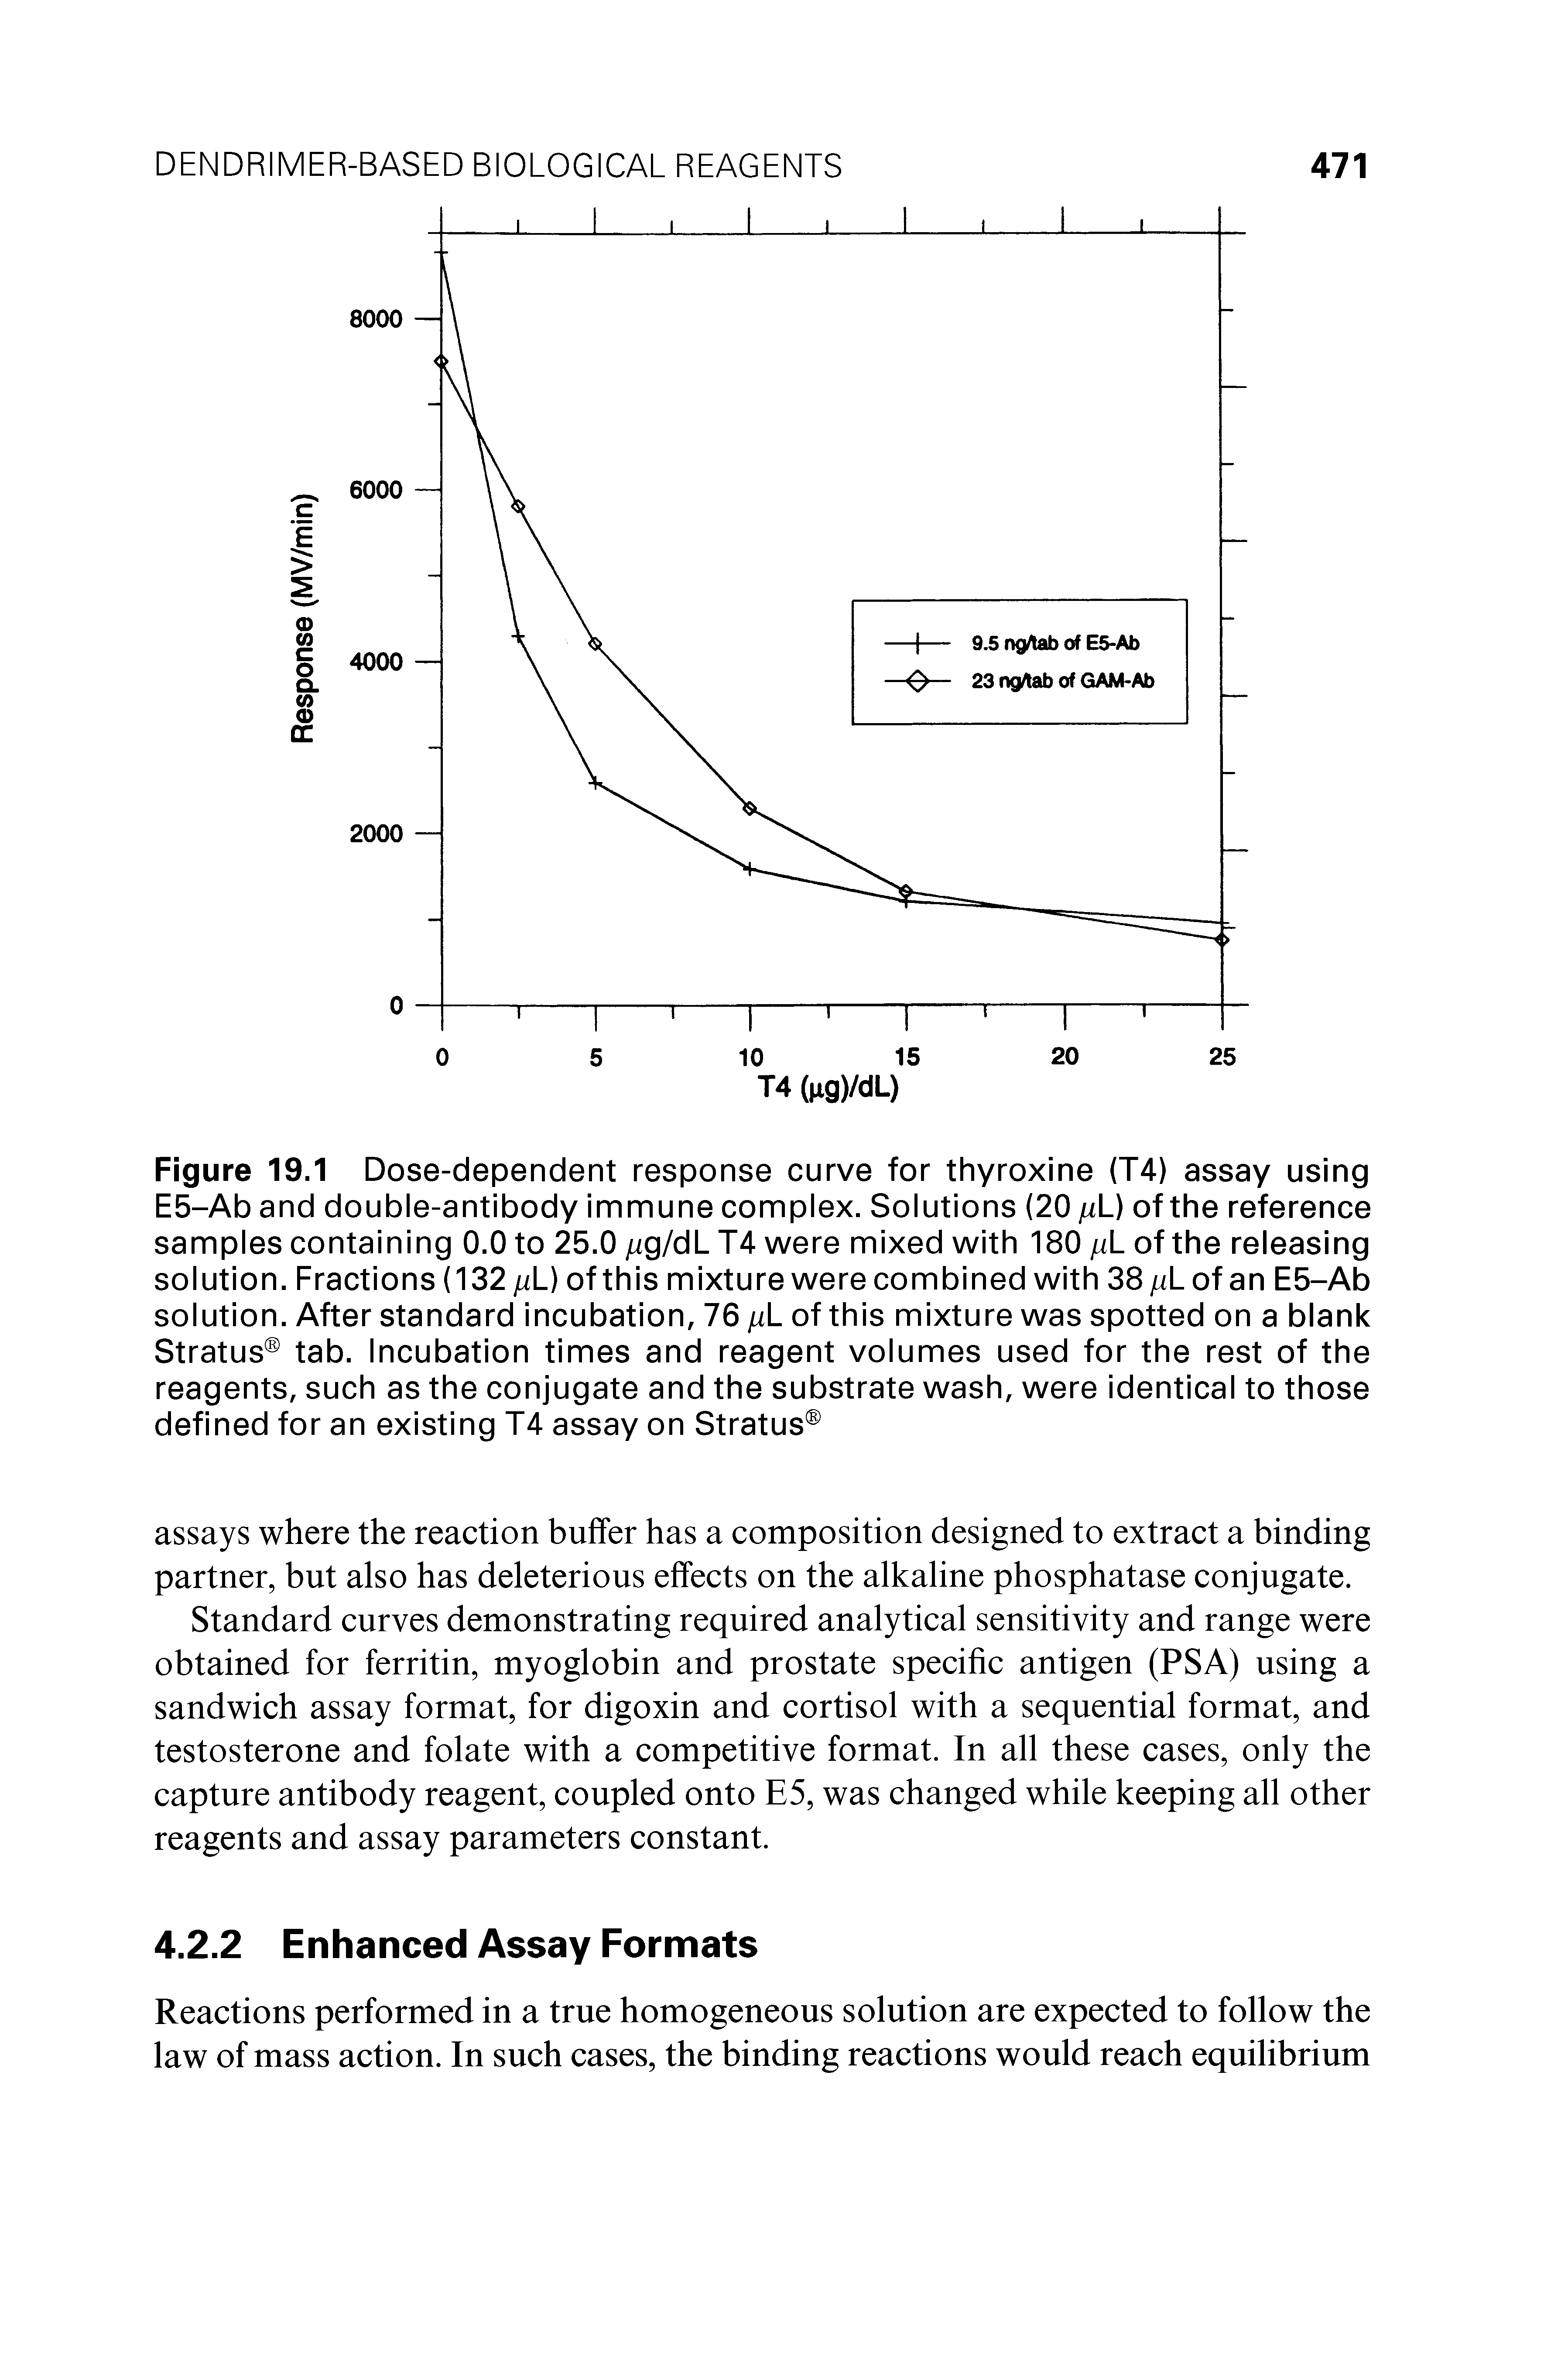 Figure 19.1 Dose-dependent response curve for thyroxine (T4) assay using E5-Ab and double-antibody immune complex. Solutions (20 juL) of the reference samples containing 0.0 to 25.0 /ig/dL T4 were mixed with 180 fiL of the releasing solution. Fractions (132 juL) of this mixture were combined with 38 //Lof an E5-Ab solution. After standard incubation, 76 A. of this mixture was spotted on a blank Stratus tab. Incubation times and reagent volumes used for the rest of the reagents, such as the conjugate and the substrate wash, were identical to those defined for an existing T4 assay on Stratus ...